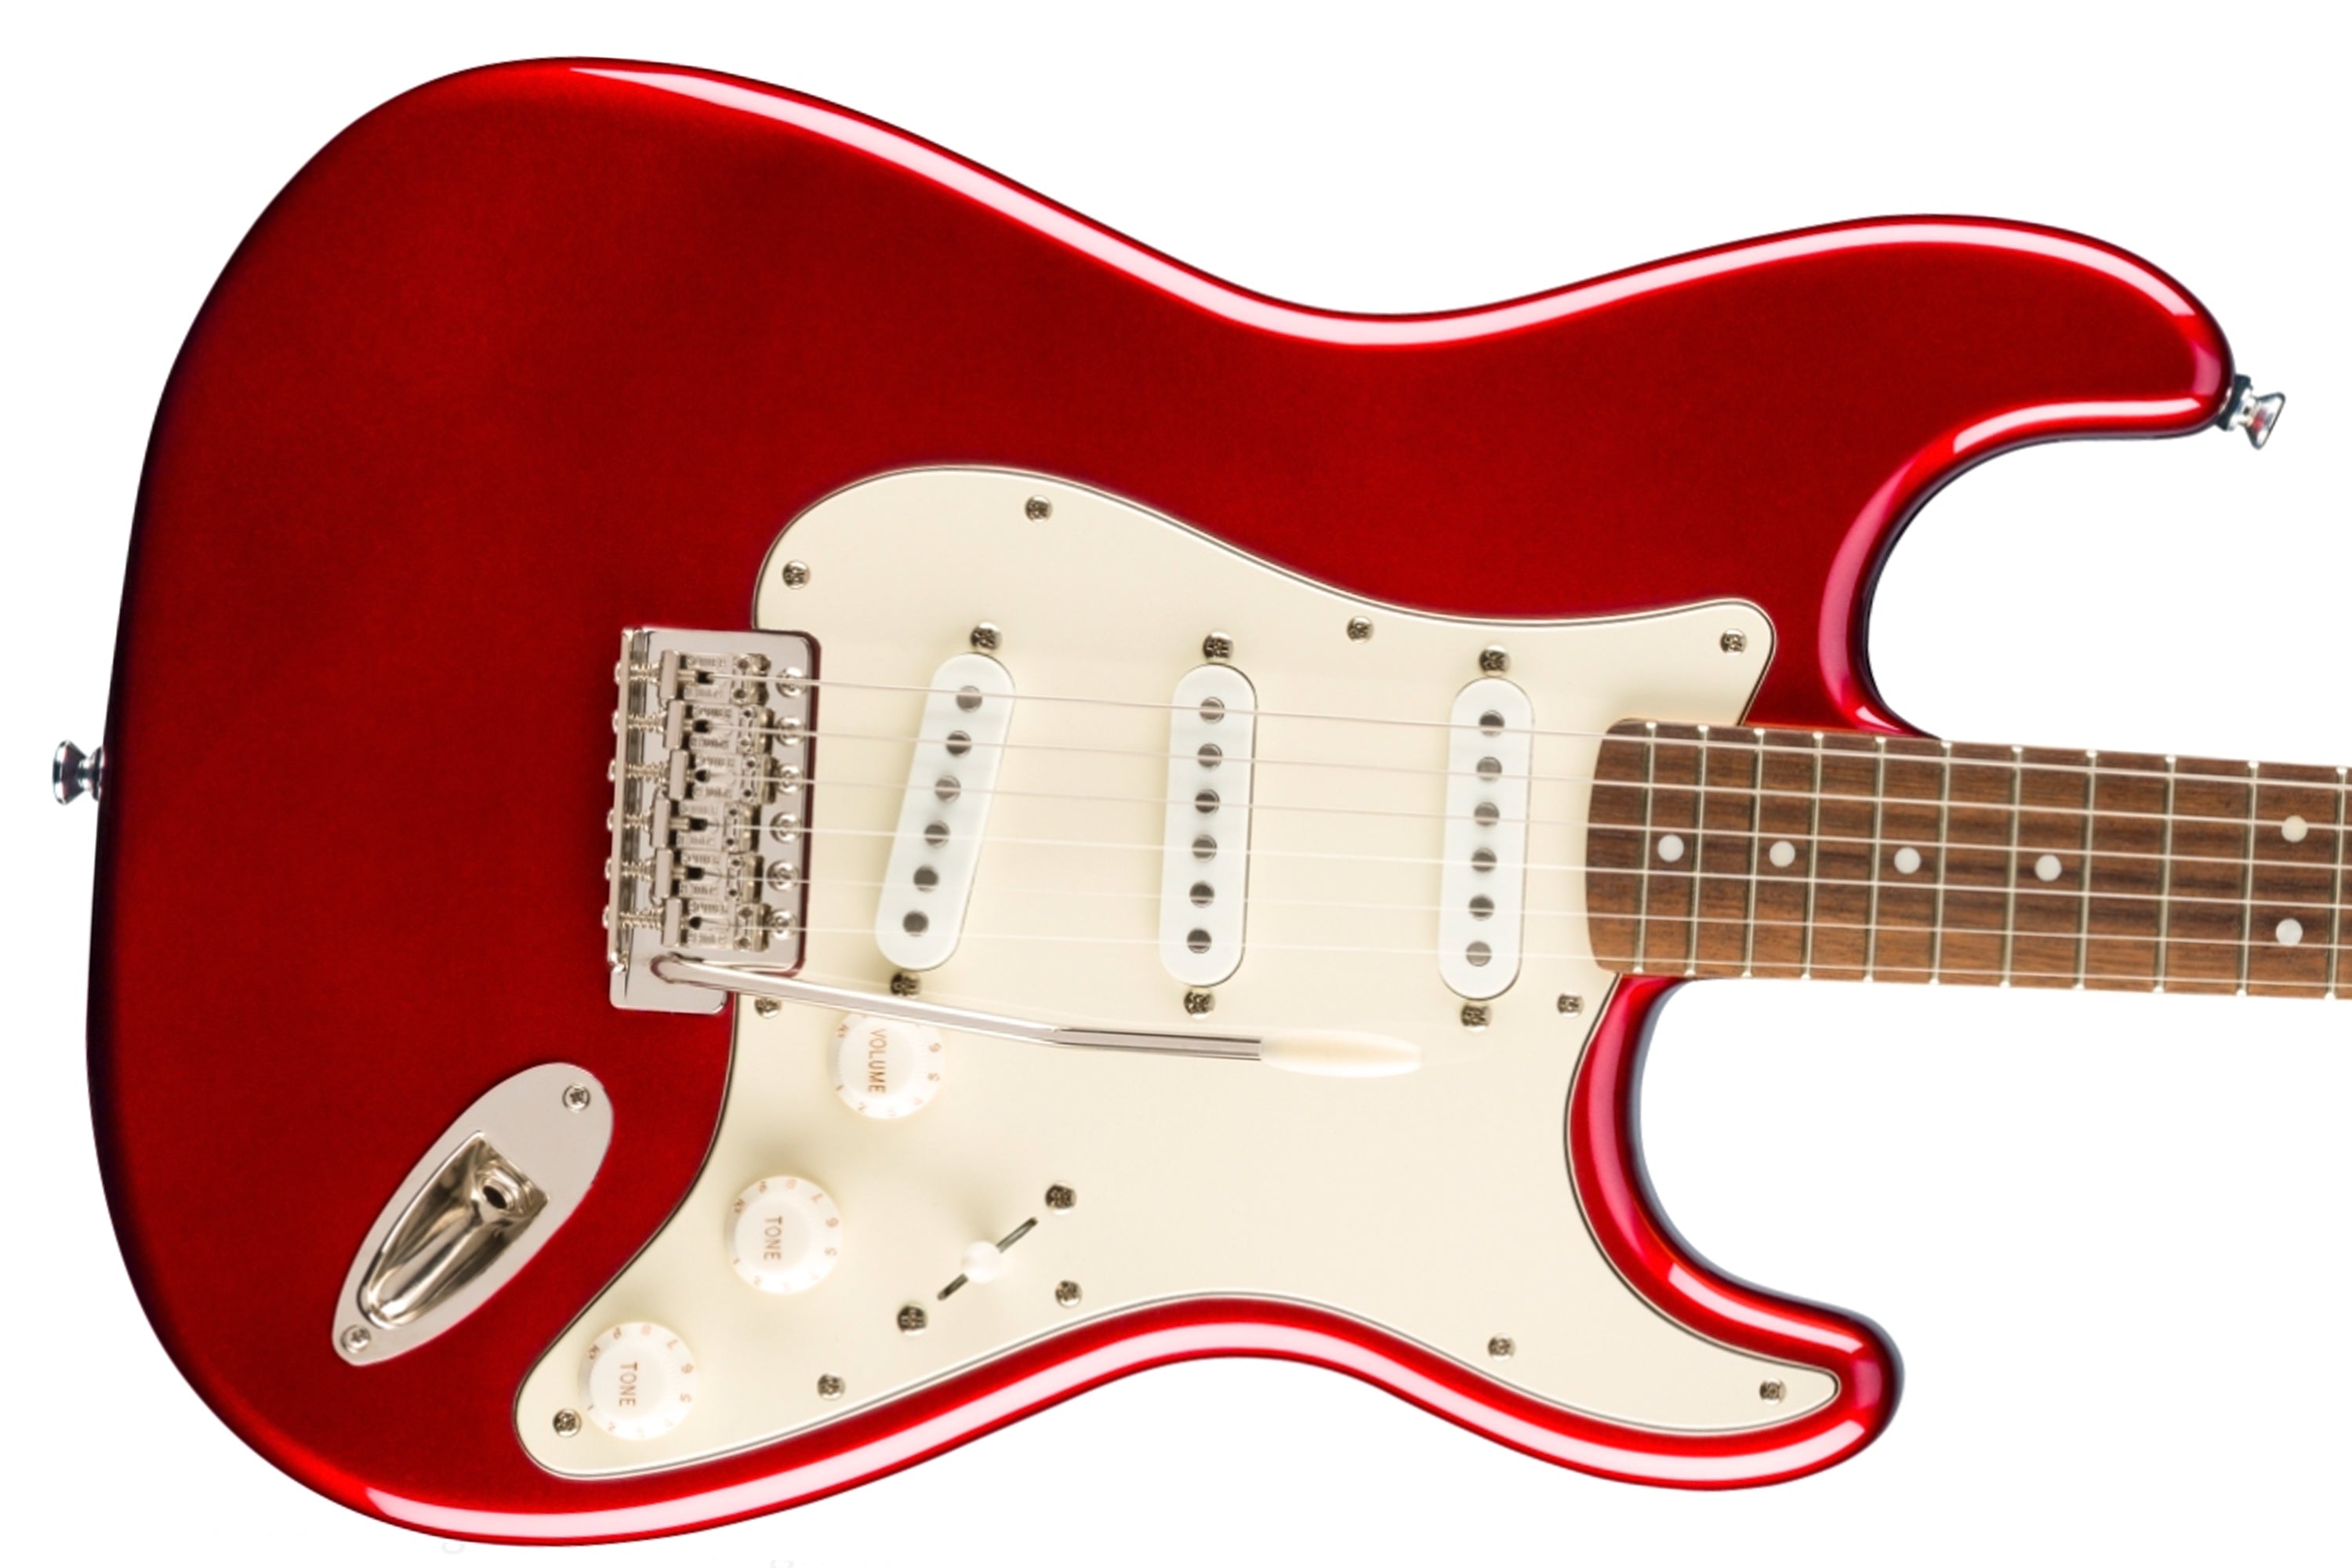 Squire By Fender Classic Vibe '60s Stratocaster Electric Guitar - Candy Apple Red